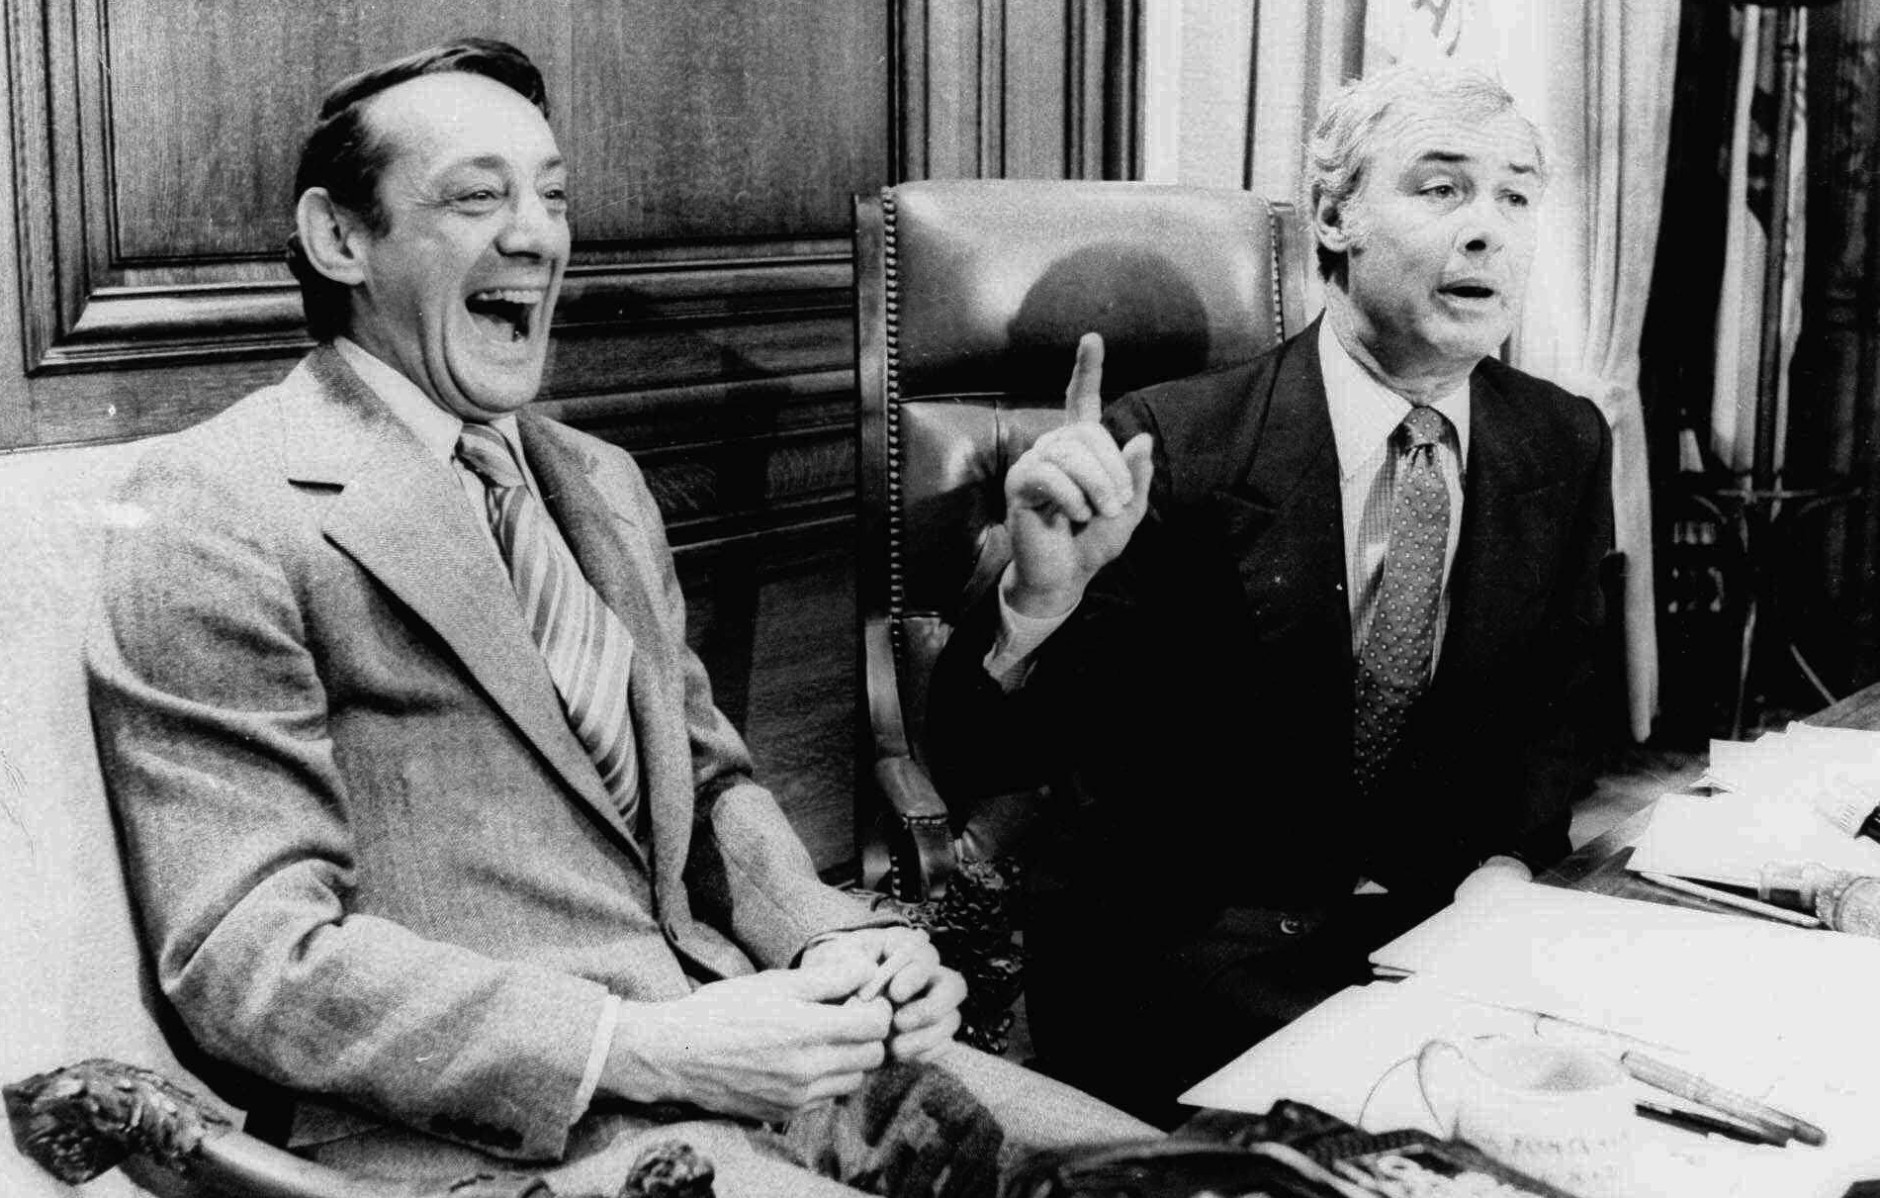 FILE - In this April 1977 file photo, San Francisco Supervisor Harvey Milk, left, and Mayor George Moscone are shown in the mayor's office during the signing of the city's gay rights bill. Officials and LGBT advocates are proposing naming a Salt Lake City street after Milk, one of the first openly gay elected officials in the United States. If passed, the move would be the latest illustration of the progressive nature of Utahs capital city despite being located in a conservative state. (AP Photo/File)